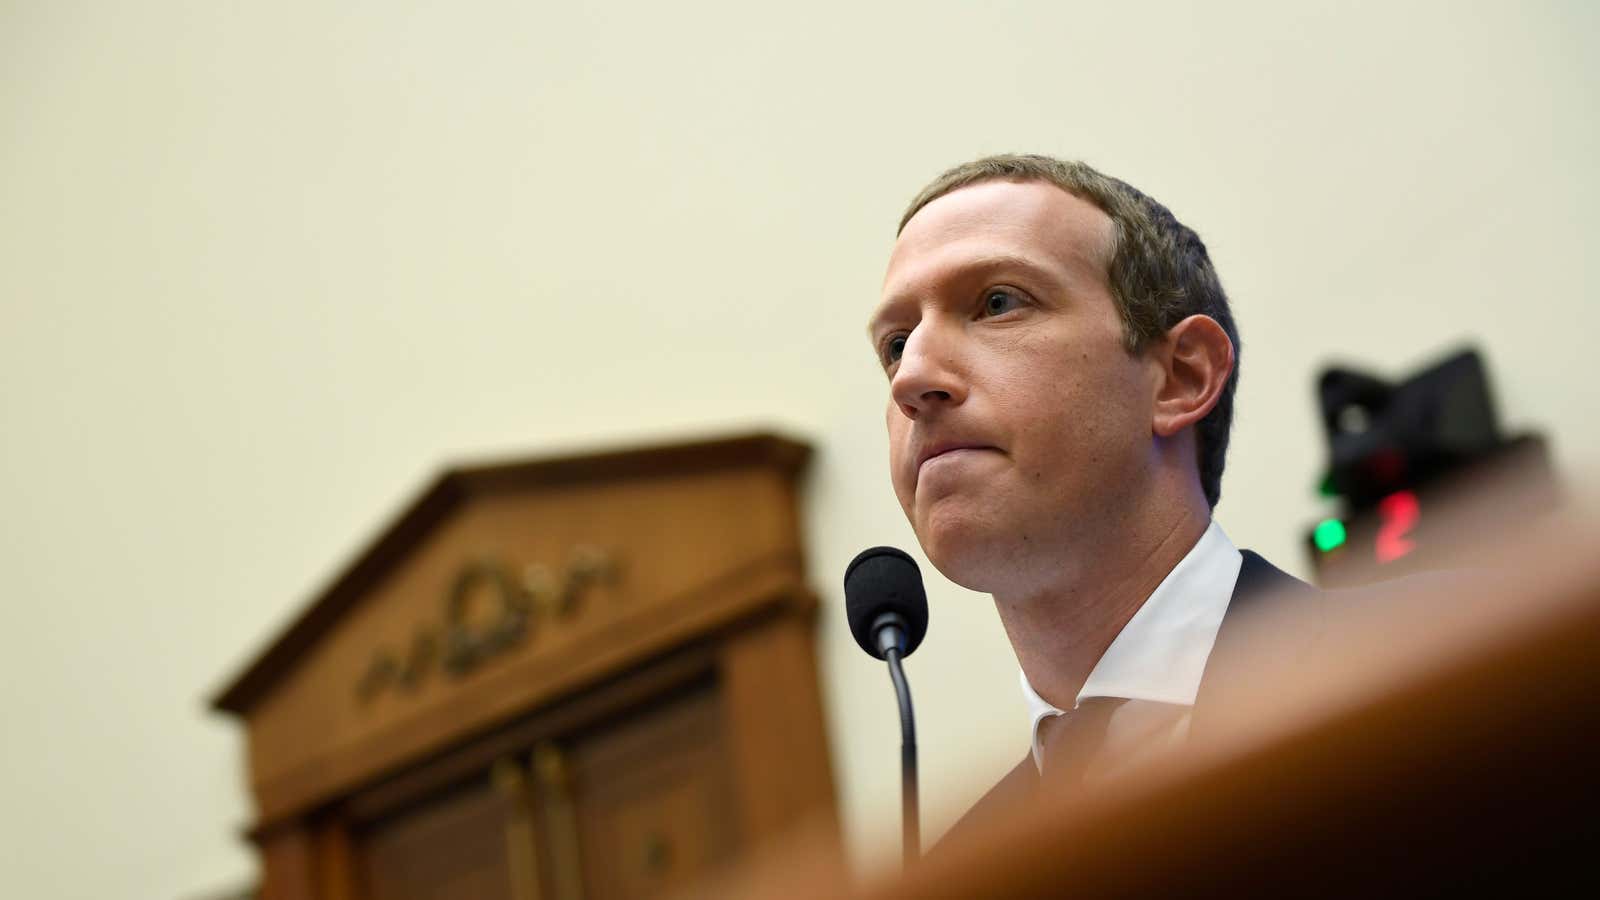 Mark Zuckerberg’s own words are key evidence in the FTC lawsuit against Facebook.